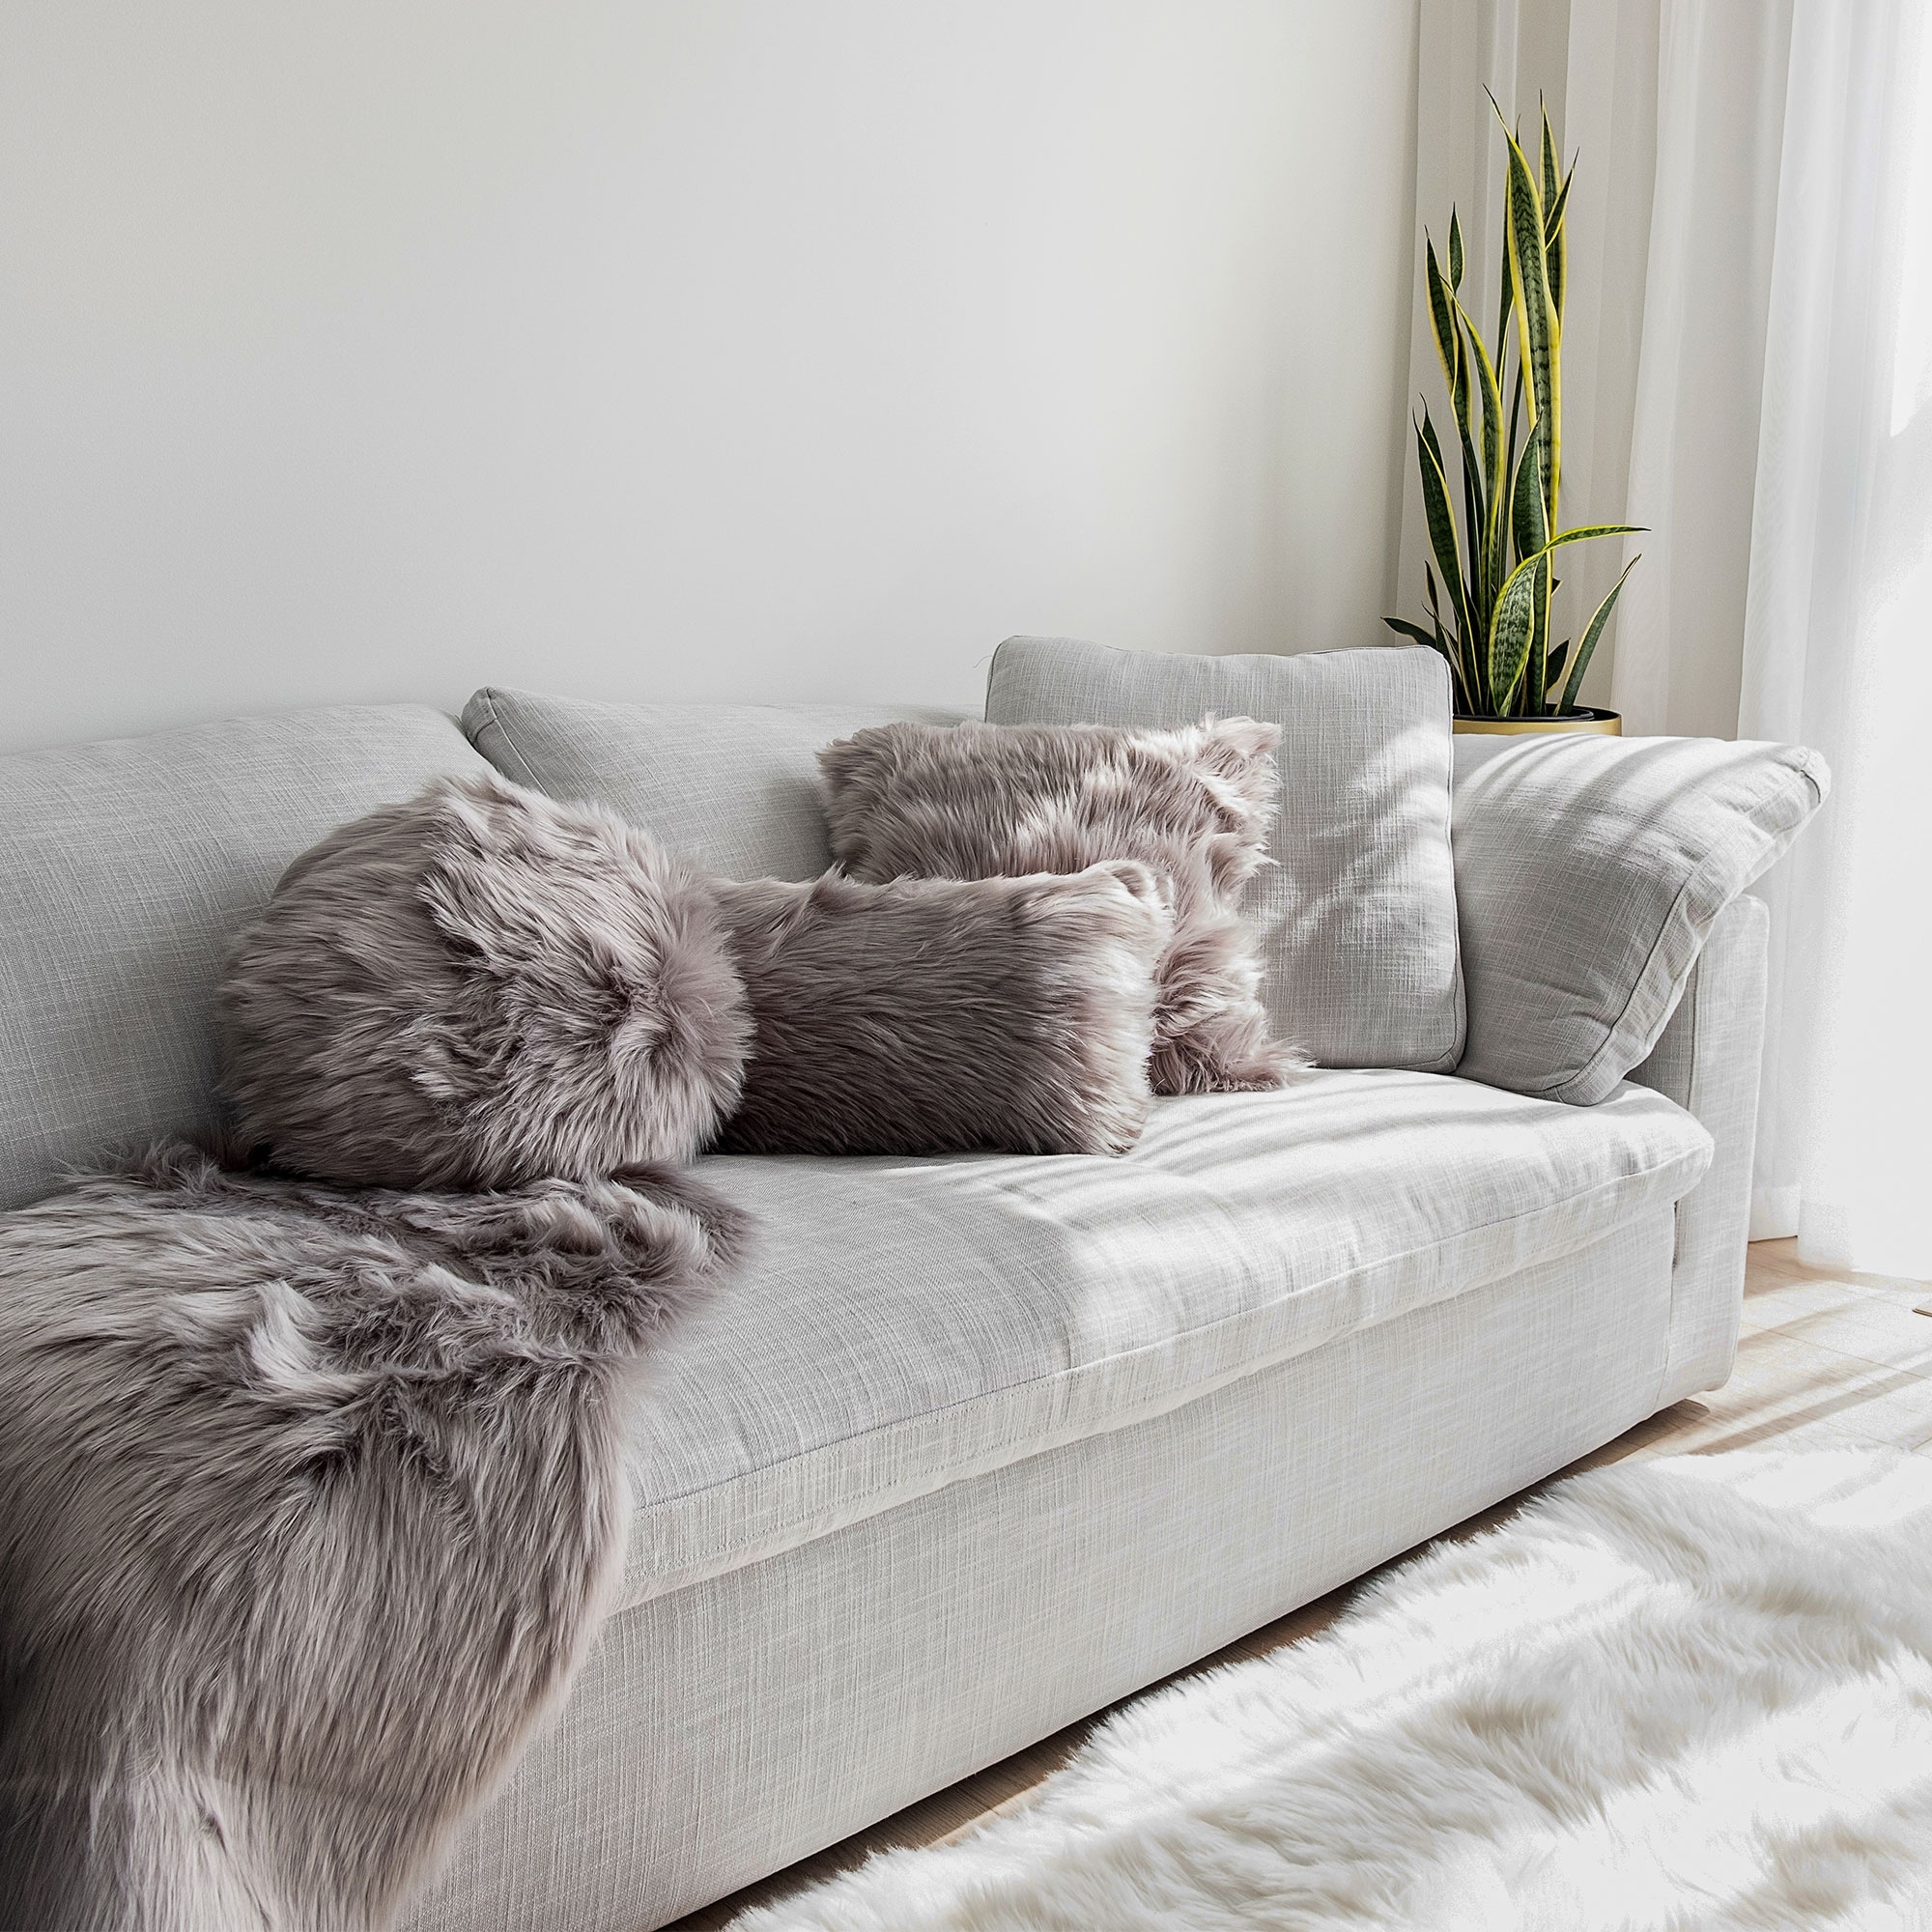 https://ak1.ostkcdn.com/images/products/is/images/direct/b752a5c65fa99b91948614e23681b4c0c7e1f3f8/Gouchee-Home-Edinburgh-Faux-Fur-Cushion-12-x-20-Set-of-2.jpg